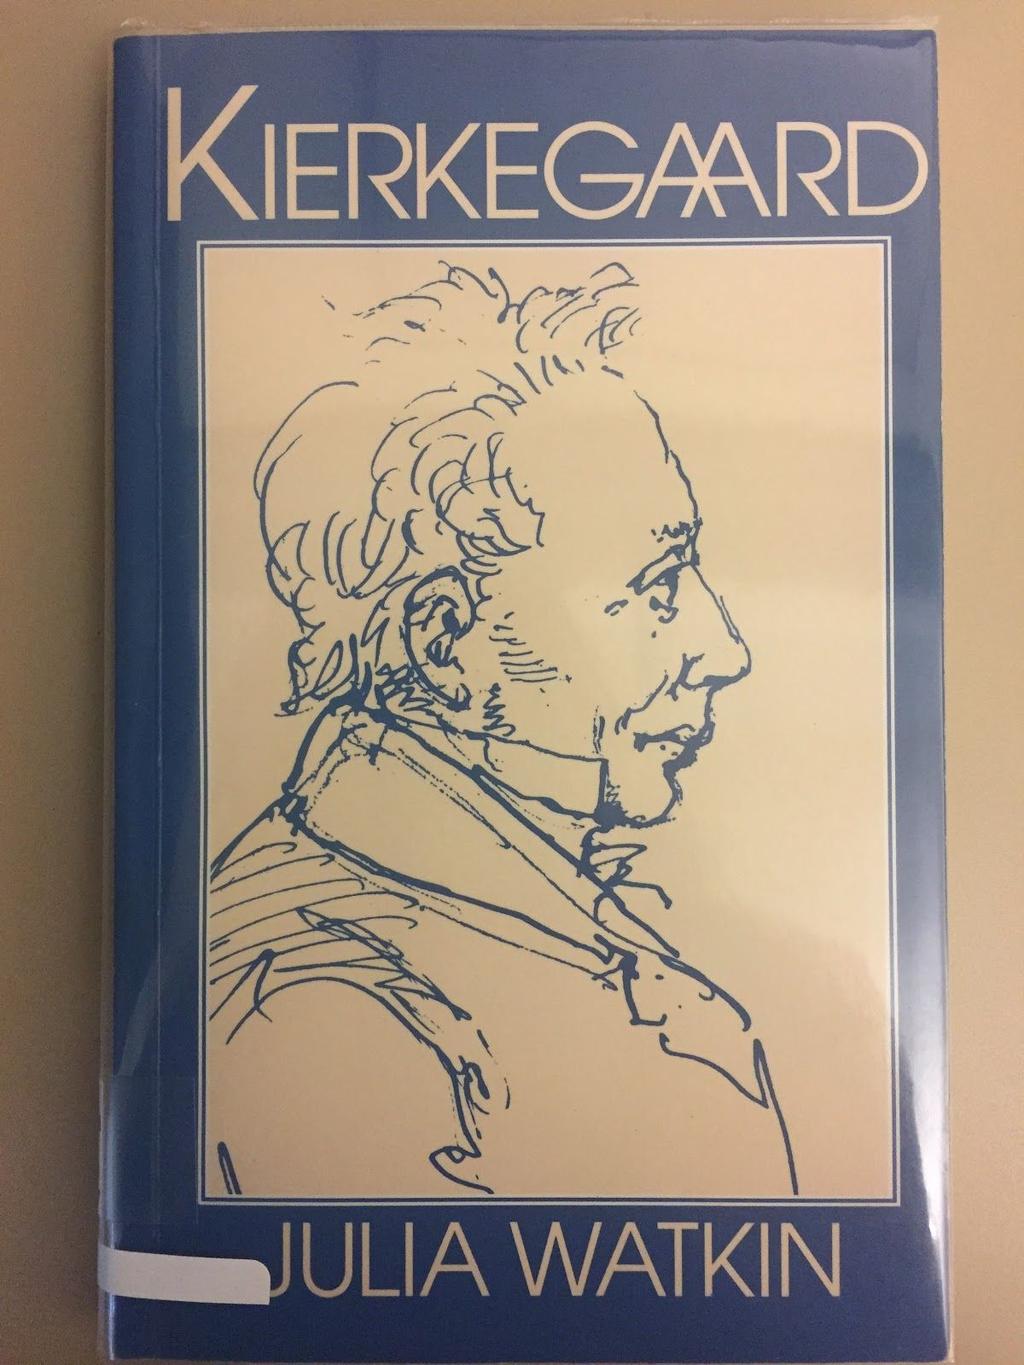 Introduction to Kierkegaard and Existentialism Kierkegaard by Julia Watkin Julia Watkin presents Kierkegaard as a Christian thinker, but as one who, without authority, boldly challenged his